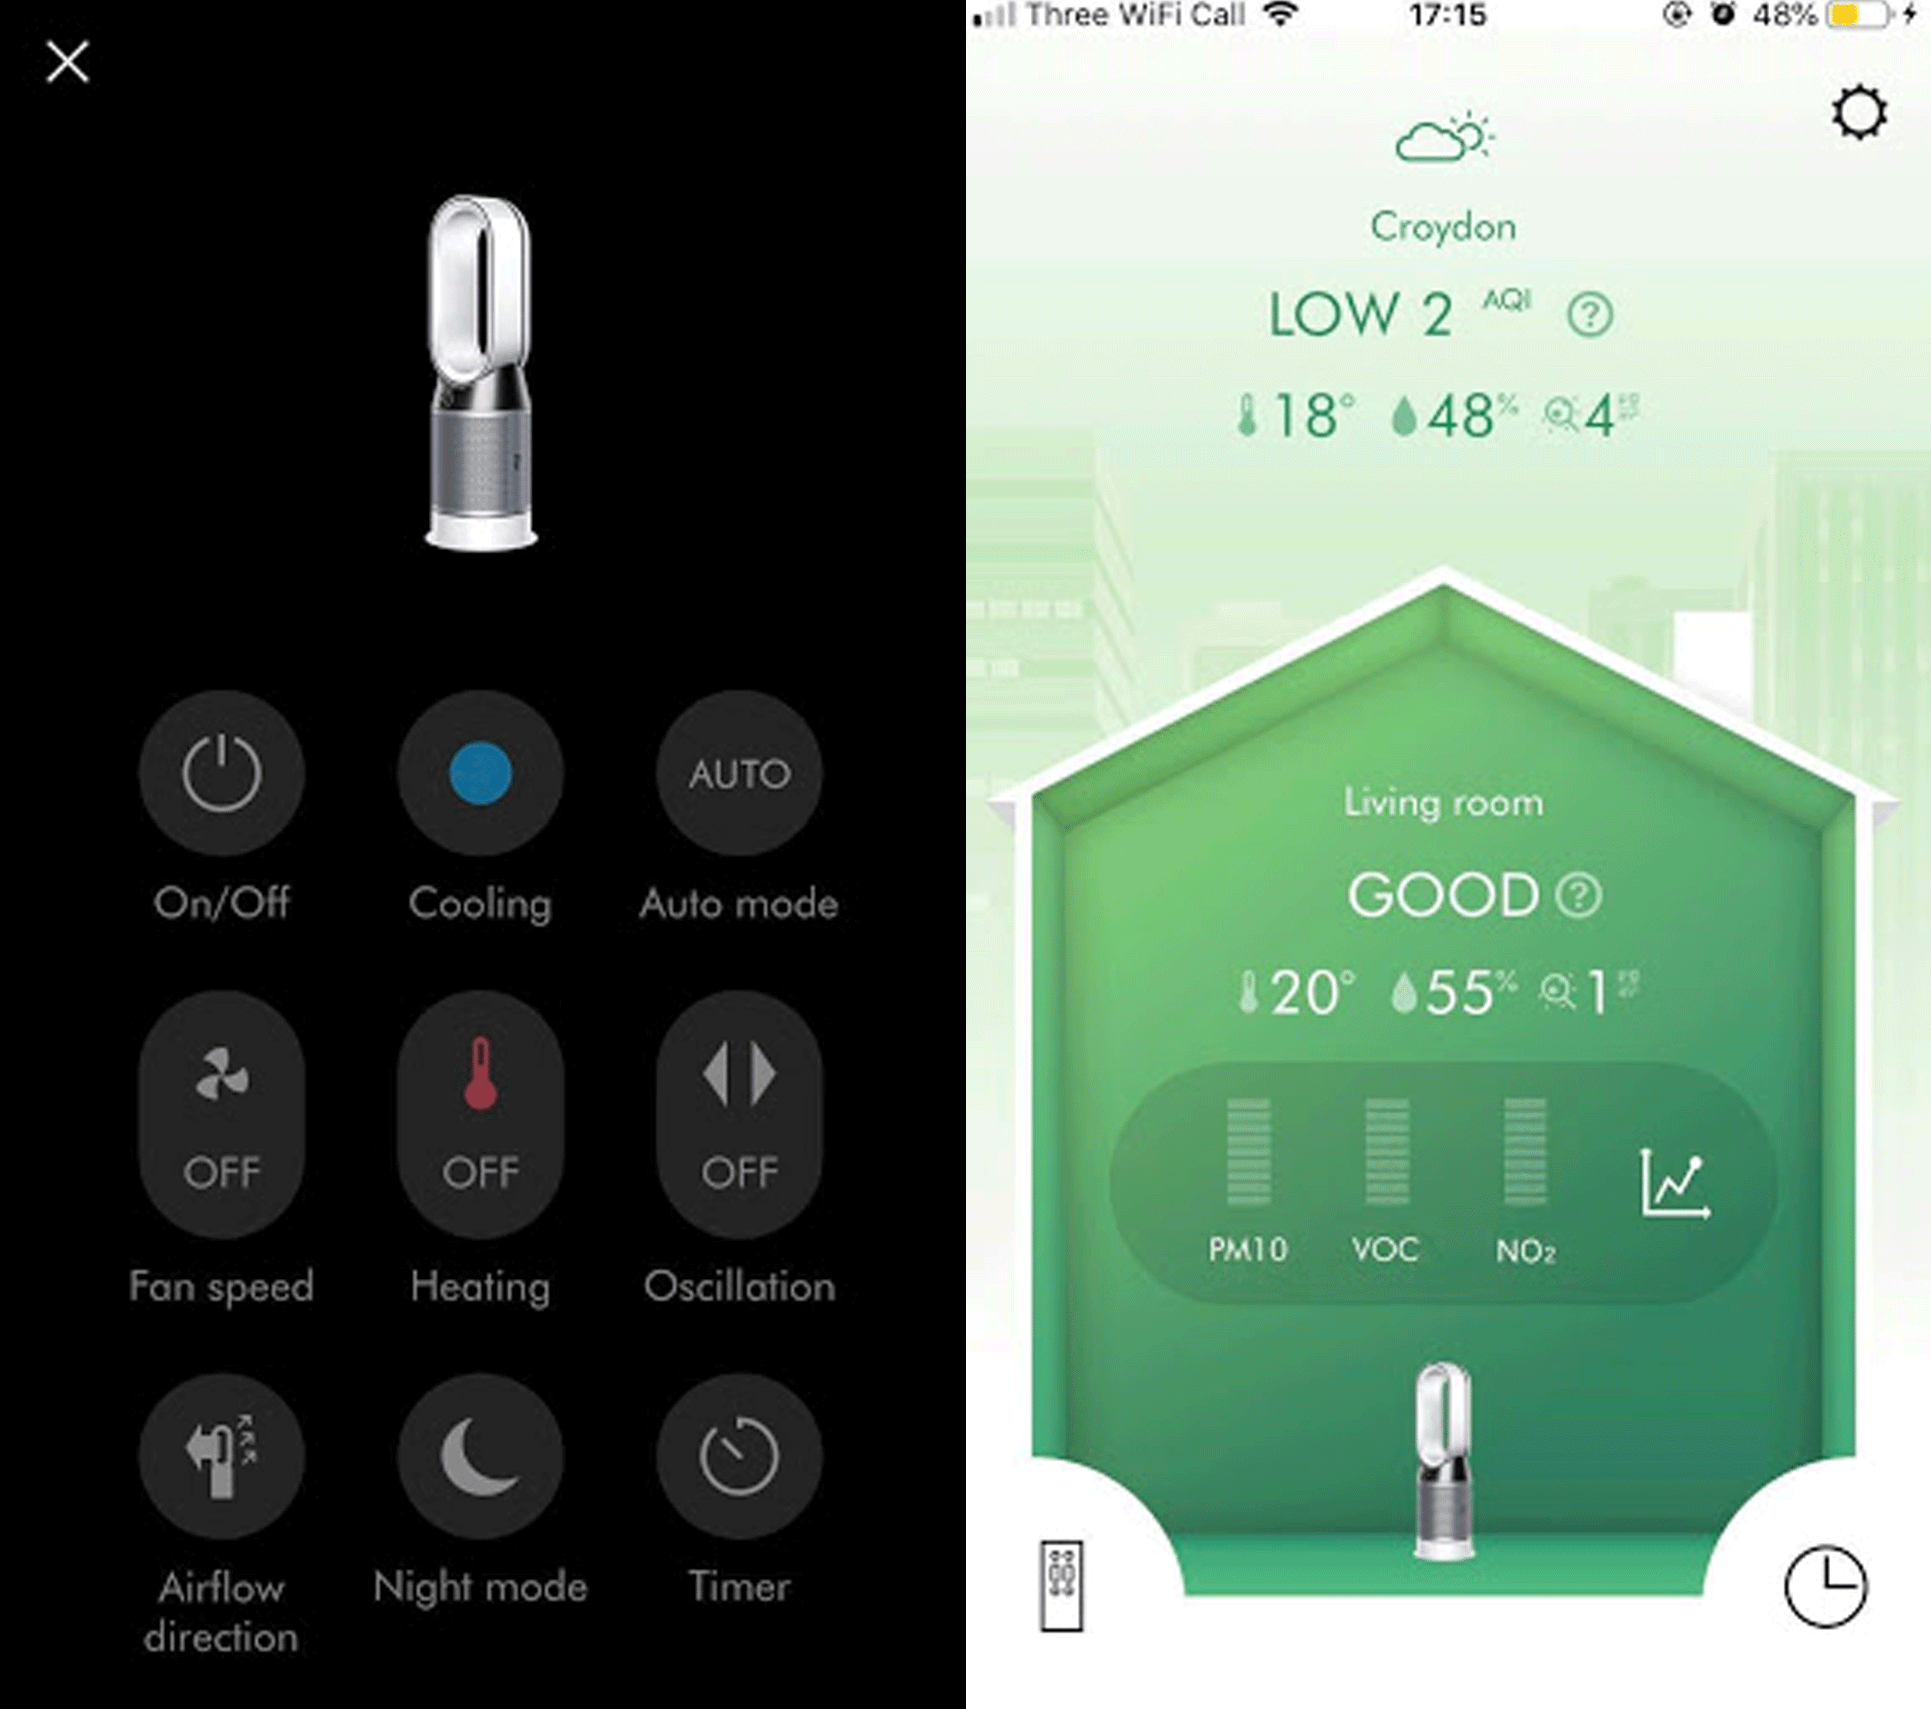 Dyson Pure Hot + Cool app screenshots from a smartphone